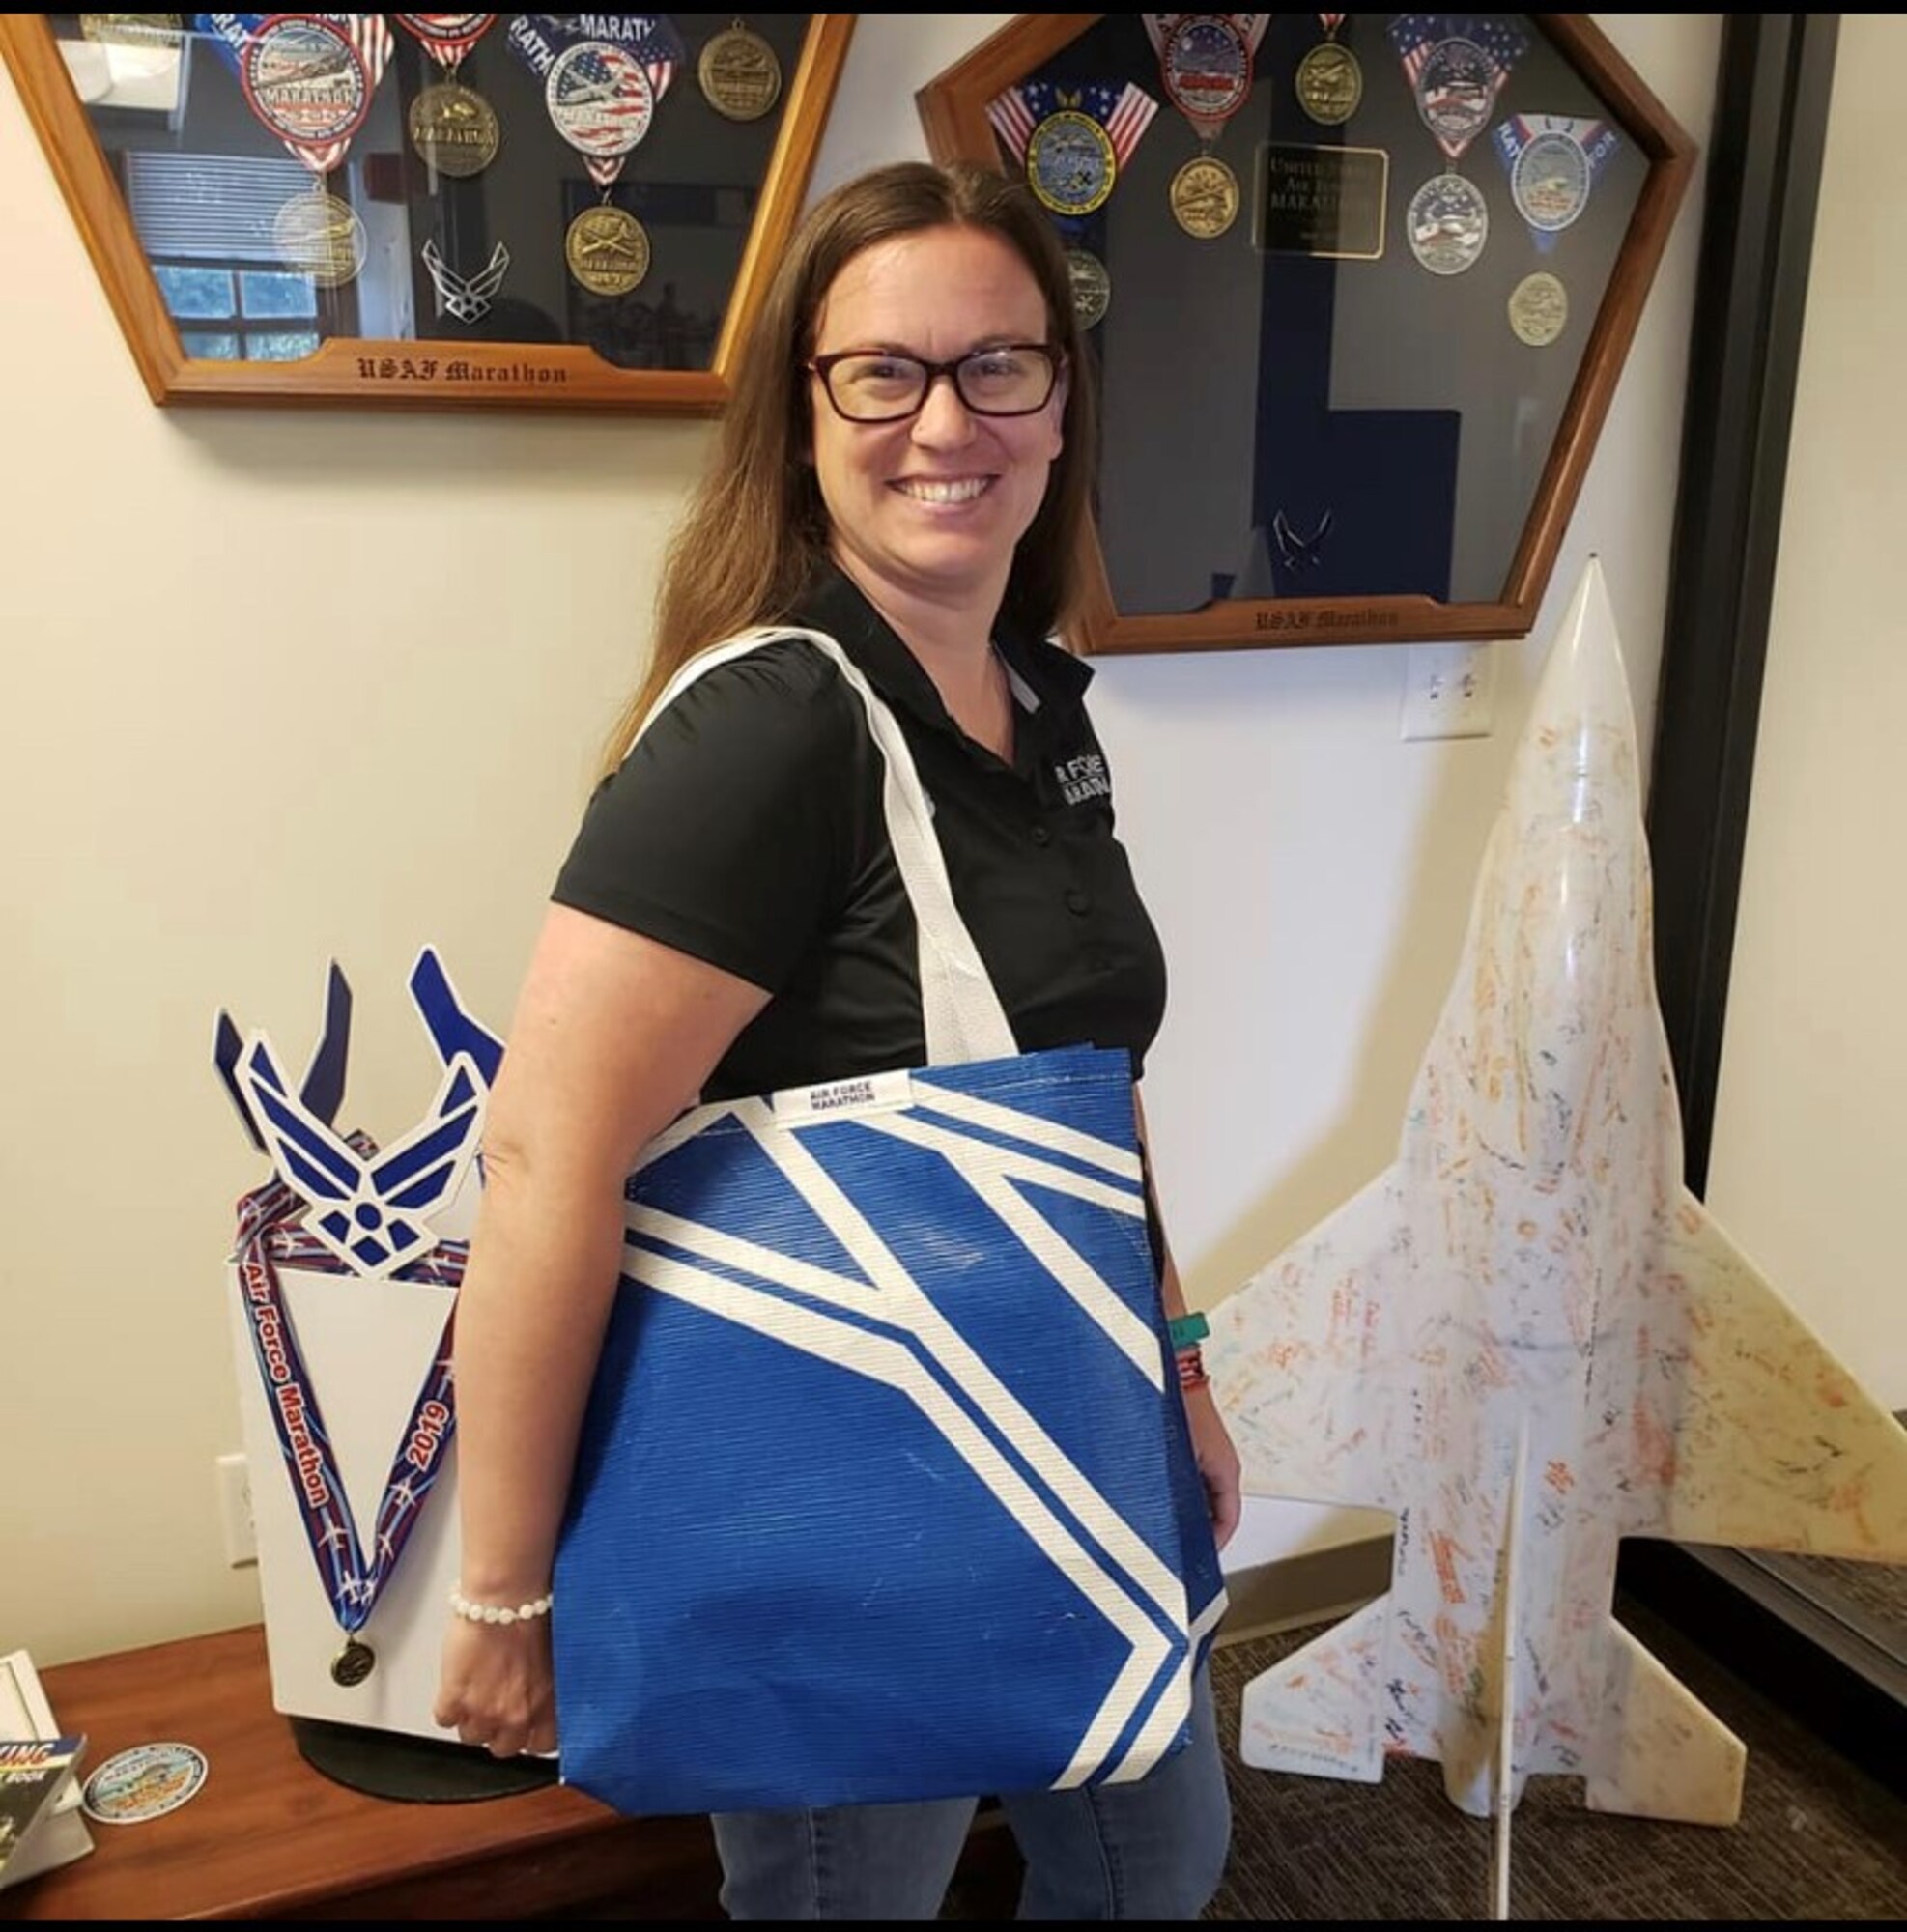 Rachael McKinney, Air Force Marathon events coordinator and Green Program lead, models the tote bag that will be given away to the “Fly Fight Win” challenge participants. The bag was made from sections of a former finish line chute at a previous race. (Courtesy photo)